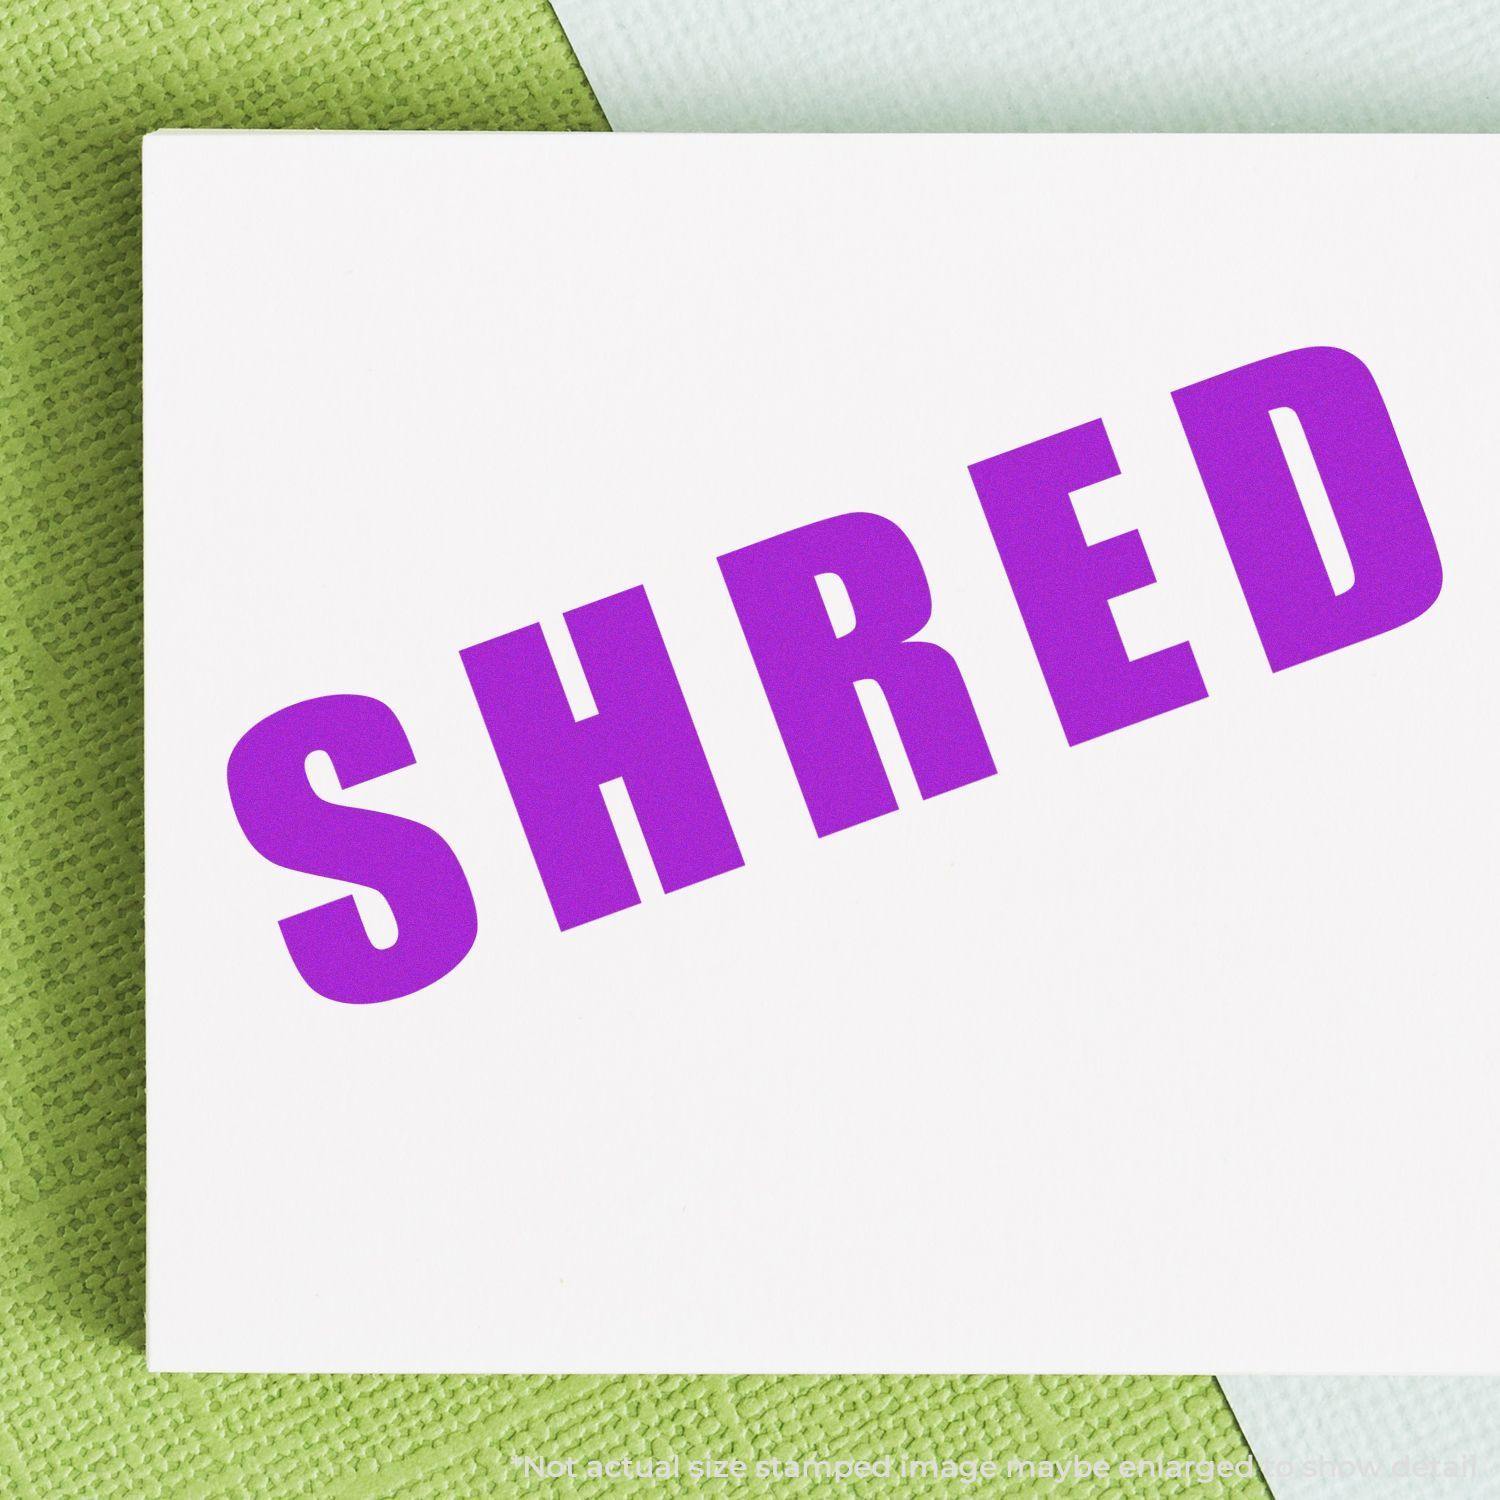 A stock office rubber stamp with a stamped image showing how the text "SHRED" in bold font is displayed after stamping.